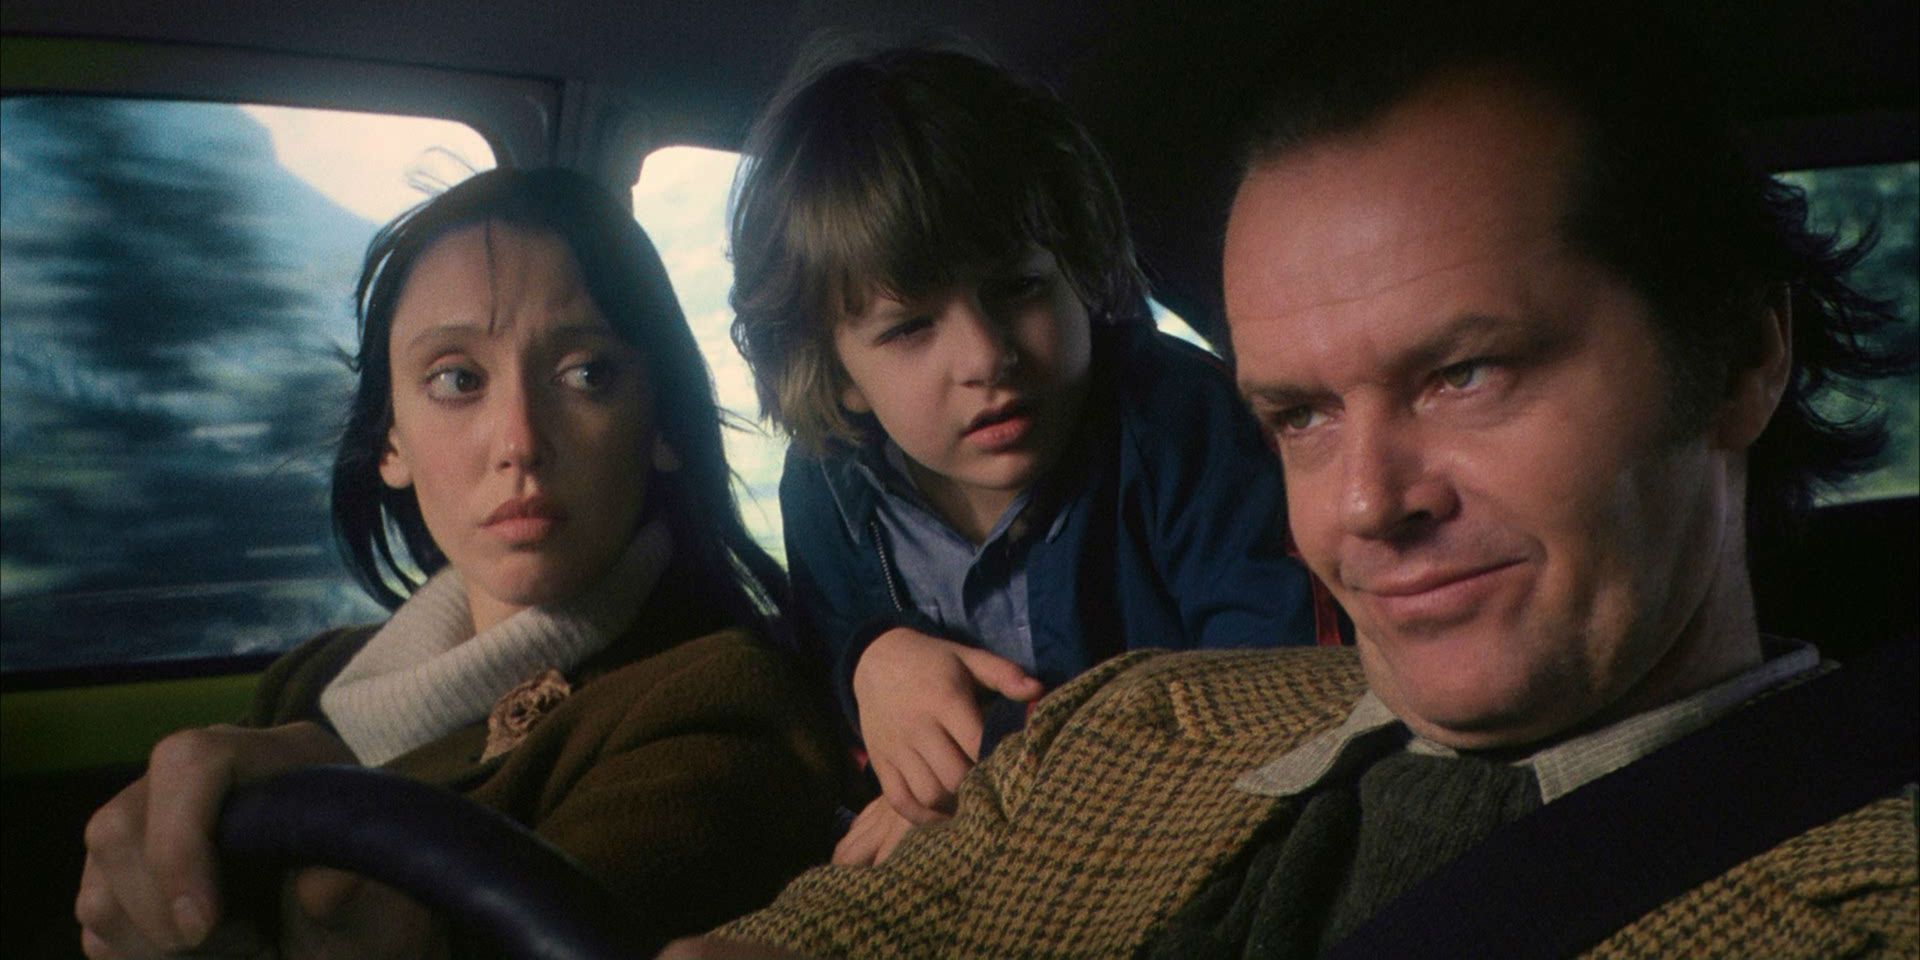 Jack drives his family to the Overlook Hotel in The Shining